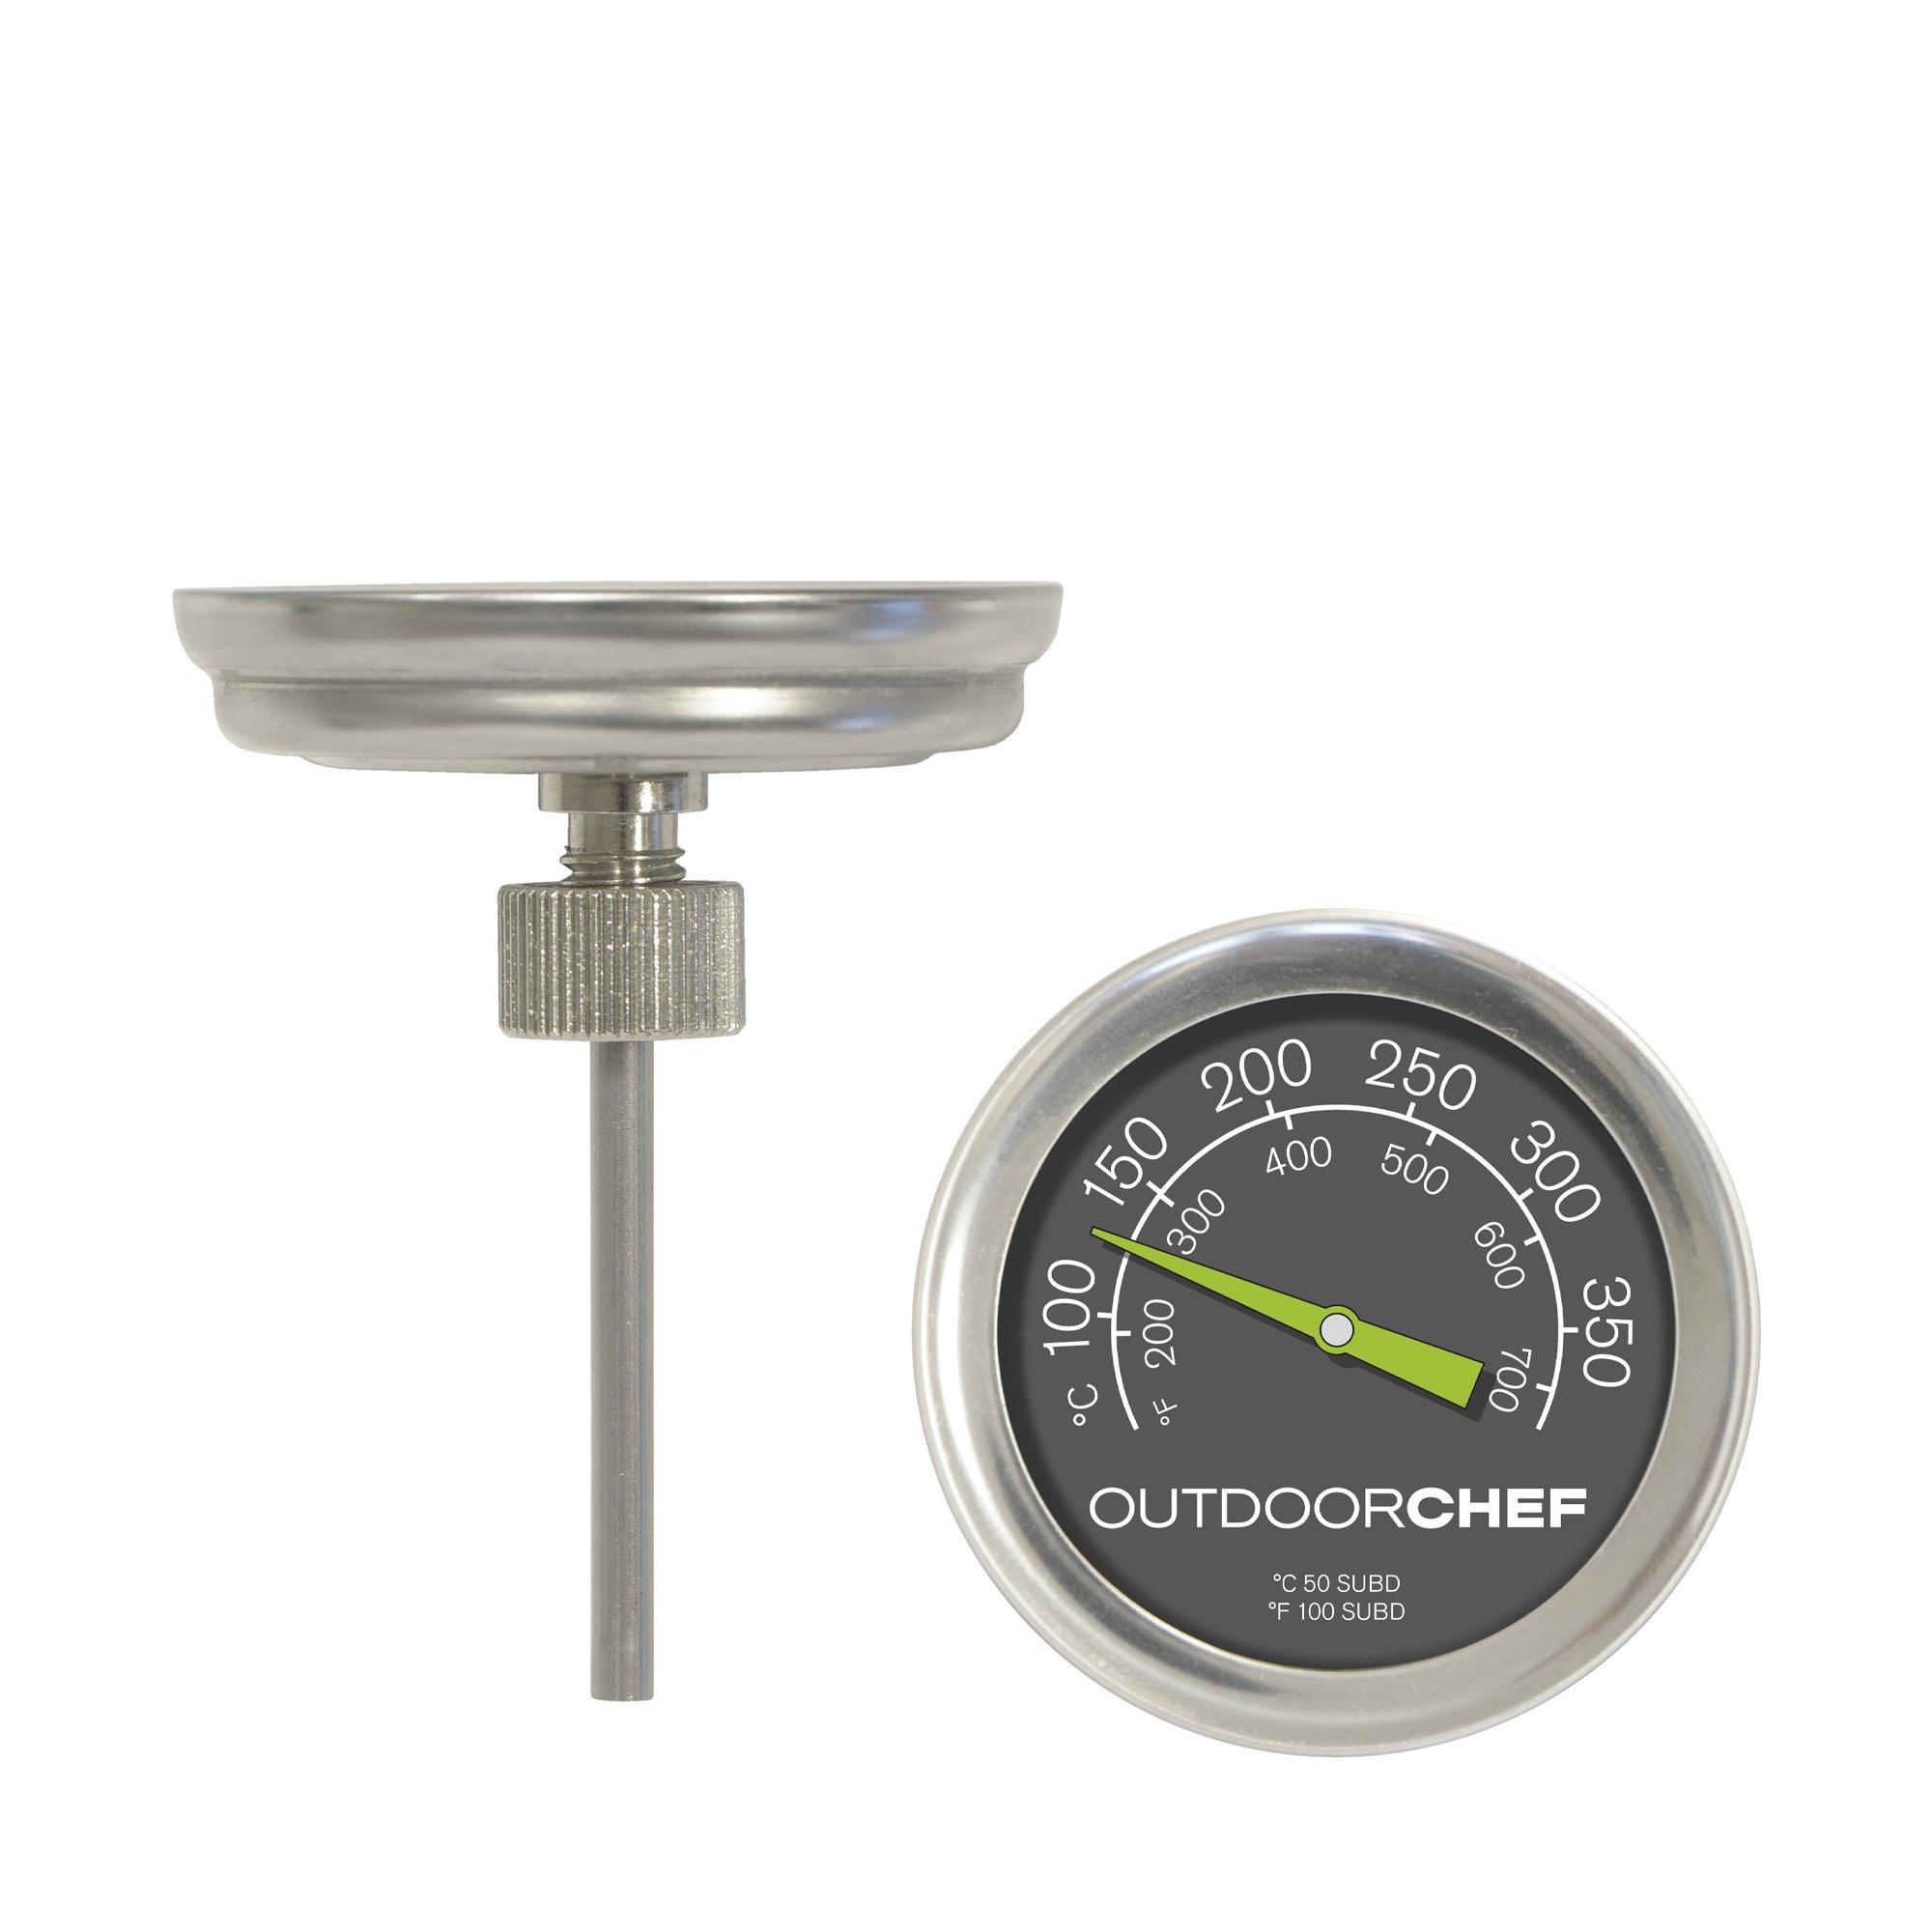 Image of Outdoorchef Analoges Grillthermometer - 7cm